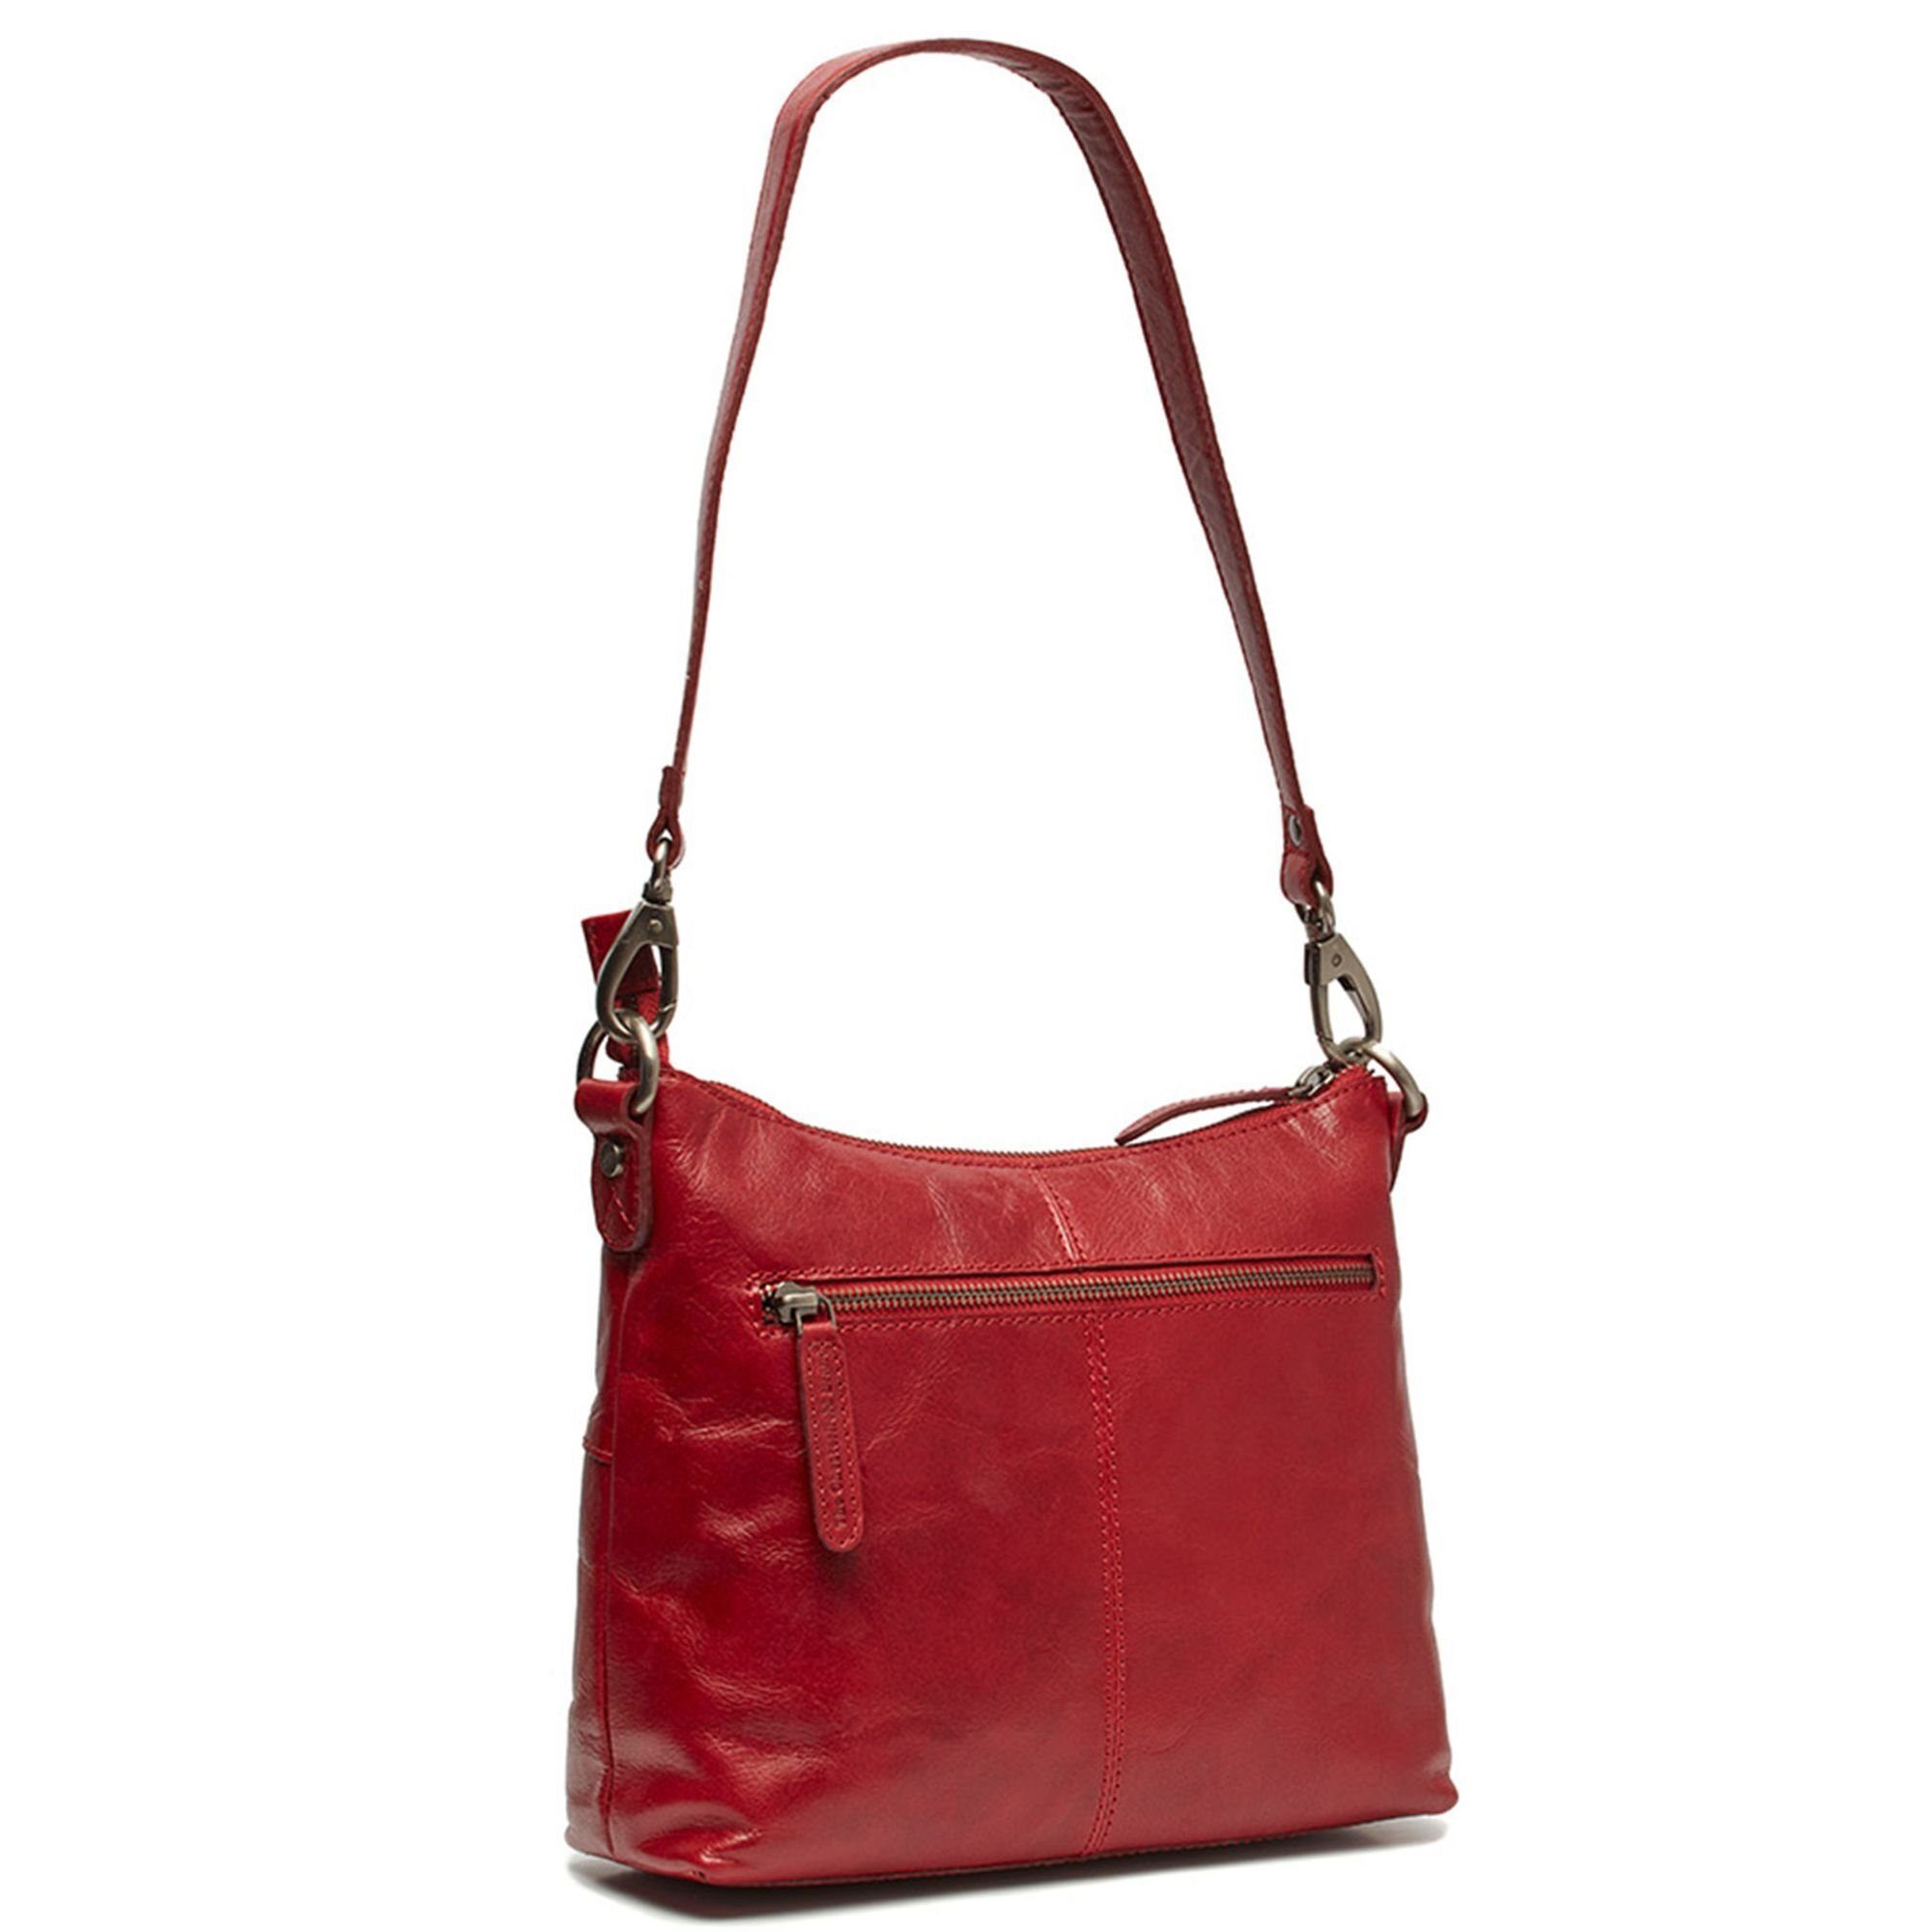 The Chesterfield Brand Schultertasche Tula, red Leder